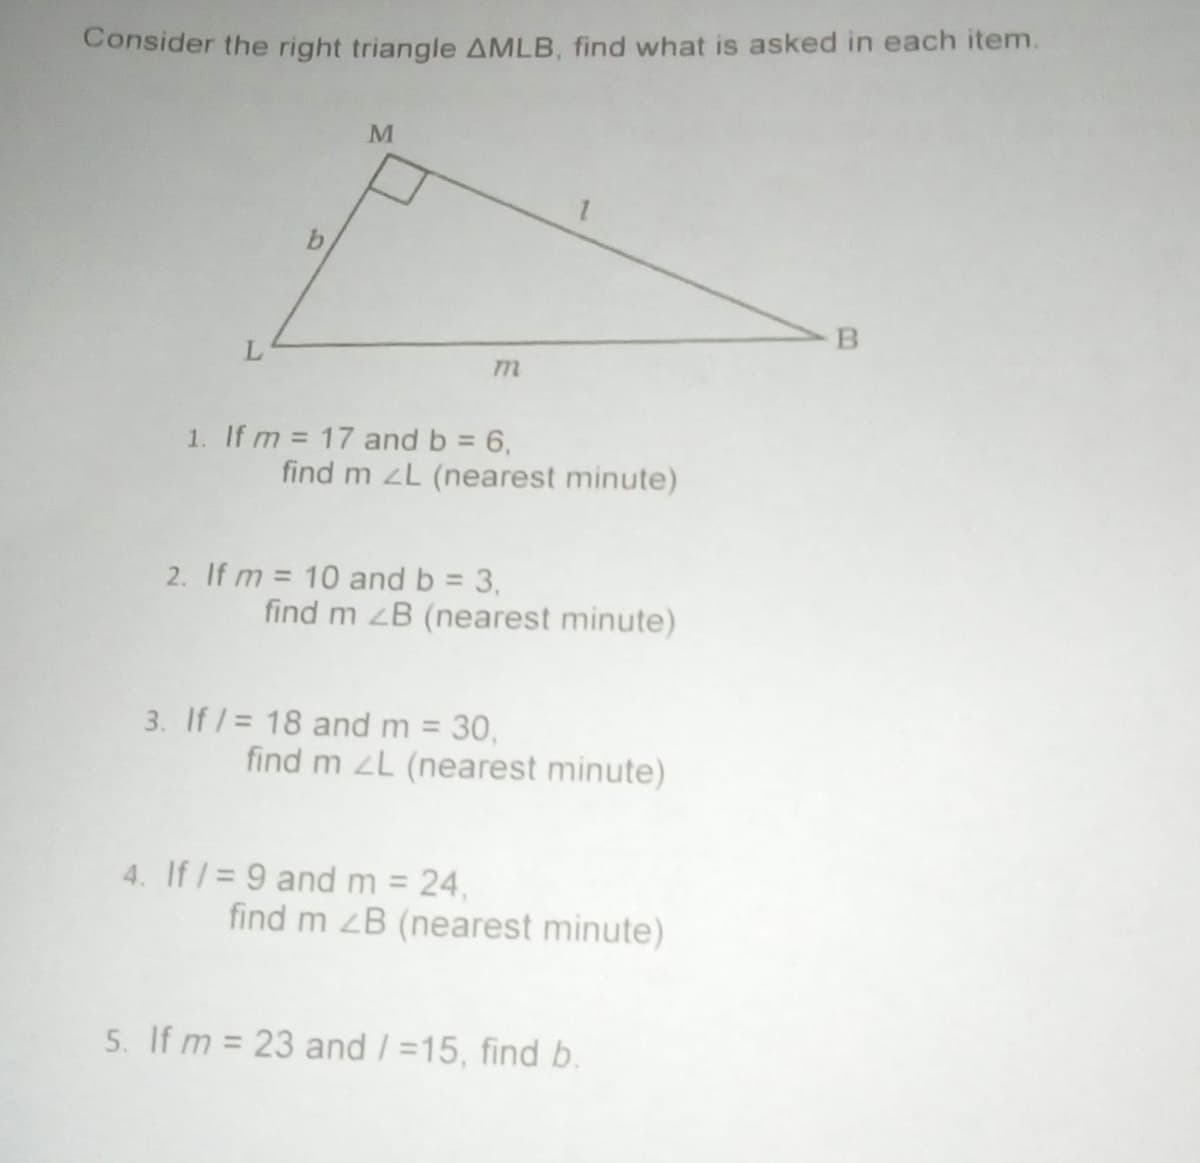 Consider the right triangle AMLB, find what is asked in each item.
L.
1. If m = 17 and b = 6,
find m zL (nearest minute)
2. If m = 10 and b = 3,
find m zB (nearest minute)
3. If /= 18 and m = 30,
find m L (nearest minute)
4. If /= 9 and m = 24,
find m zB (nearest minute)
5. If m = 23 and / =15, find b.
